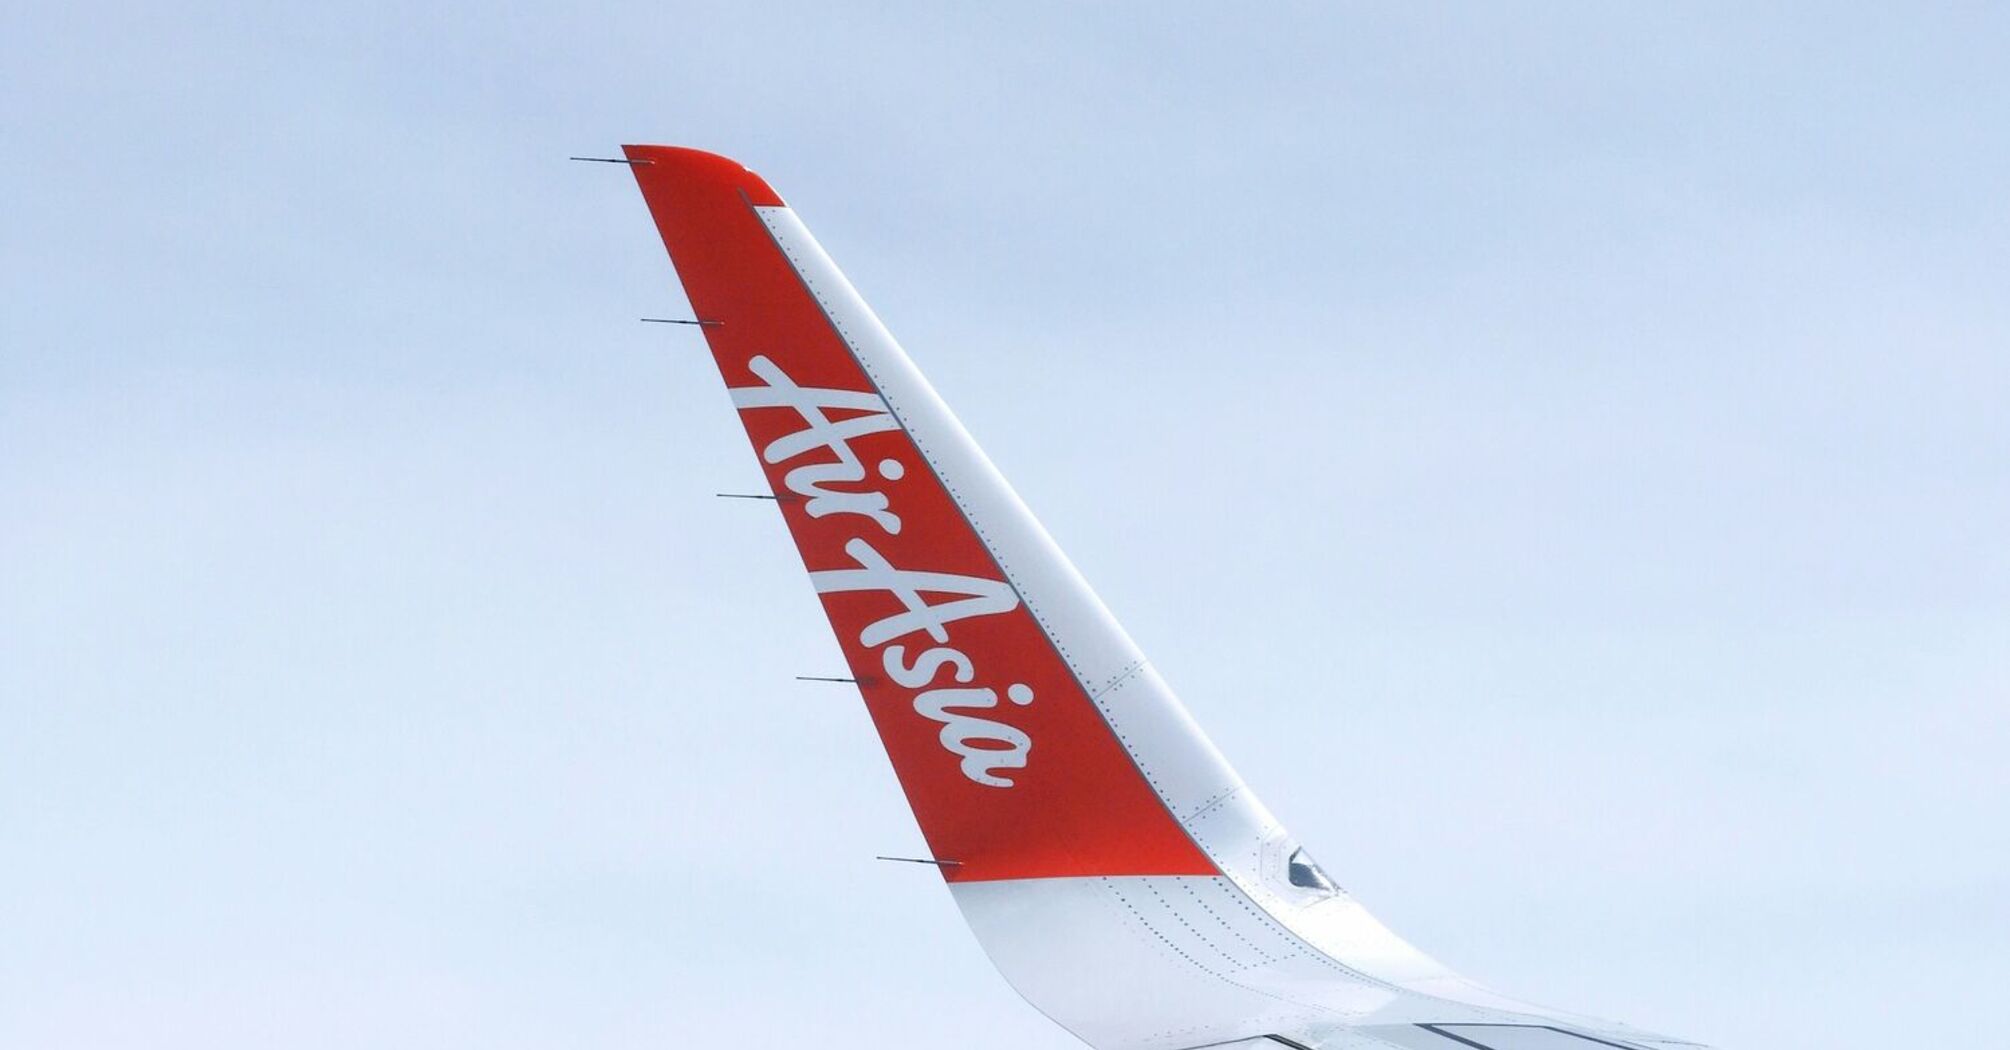 Wing of an AirAsia plane against a clear sky background